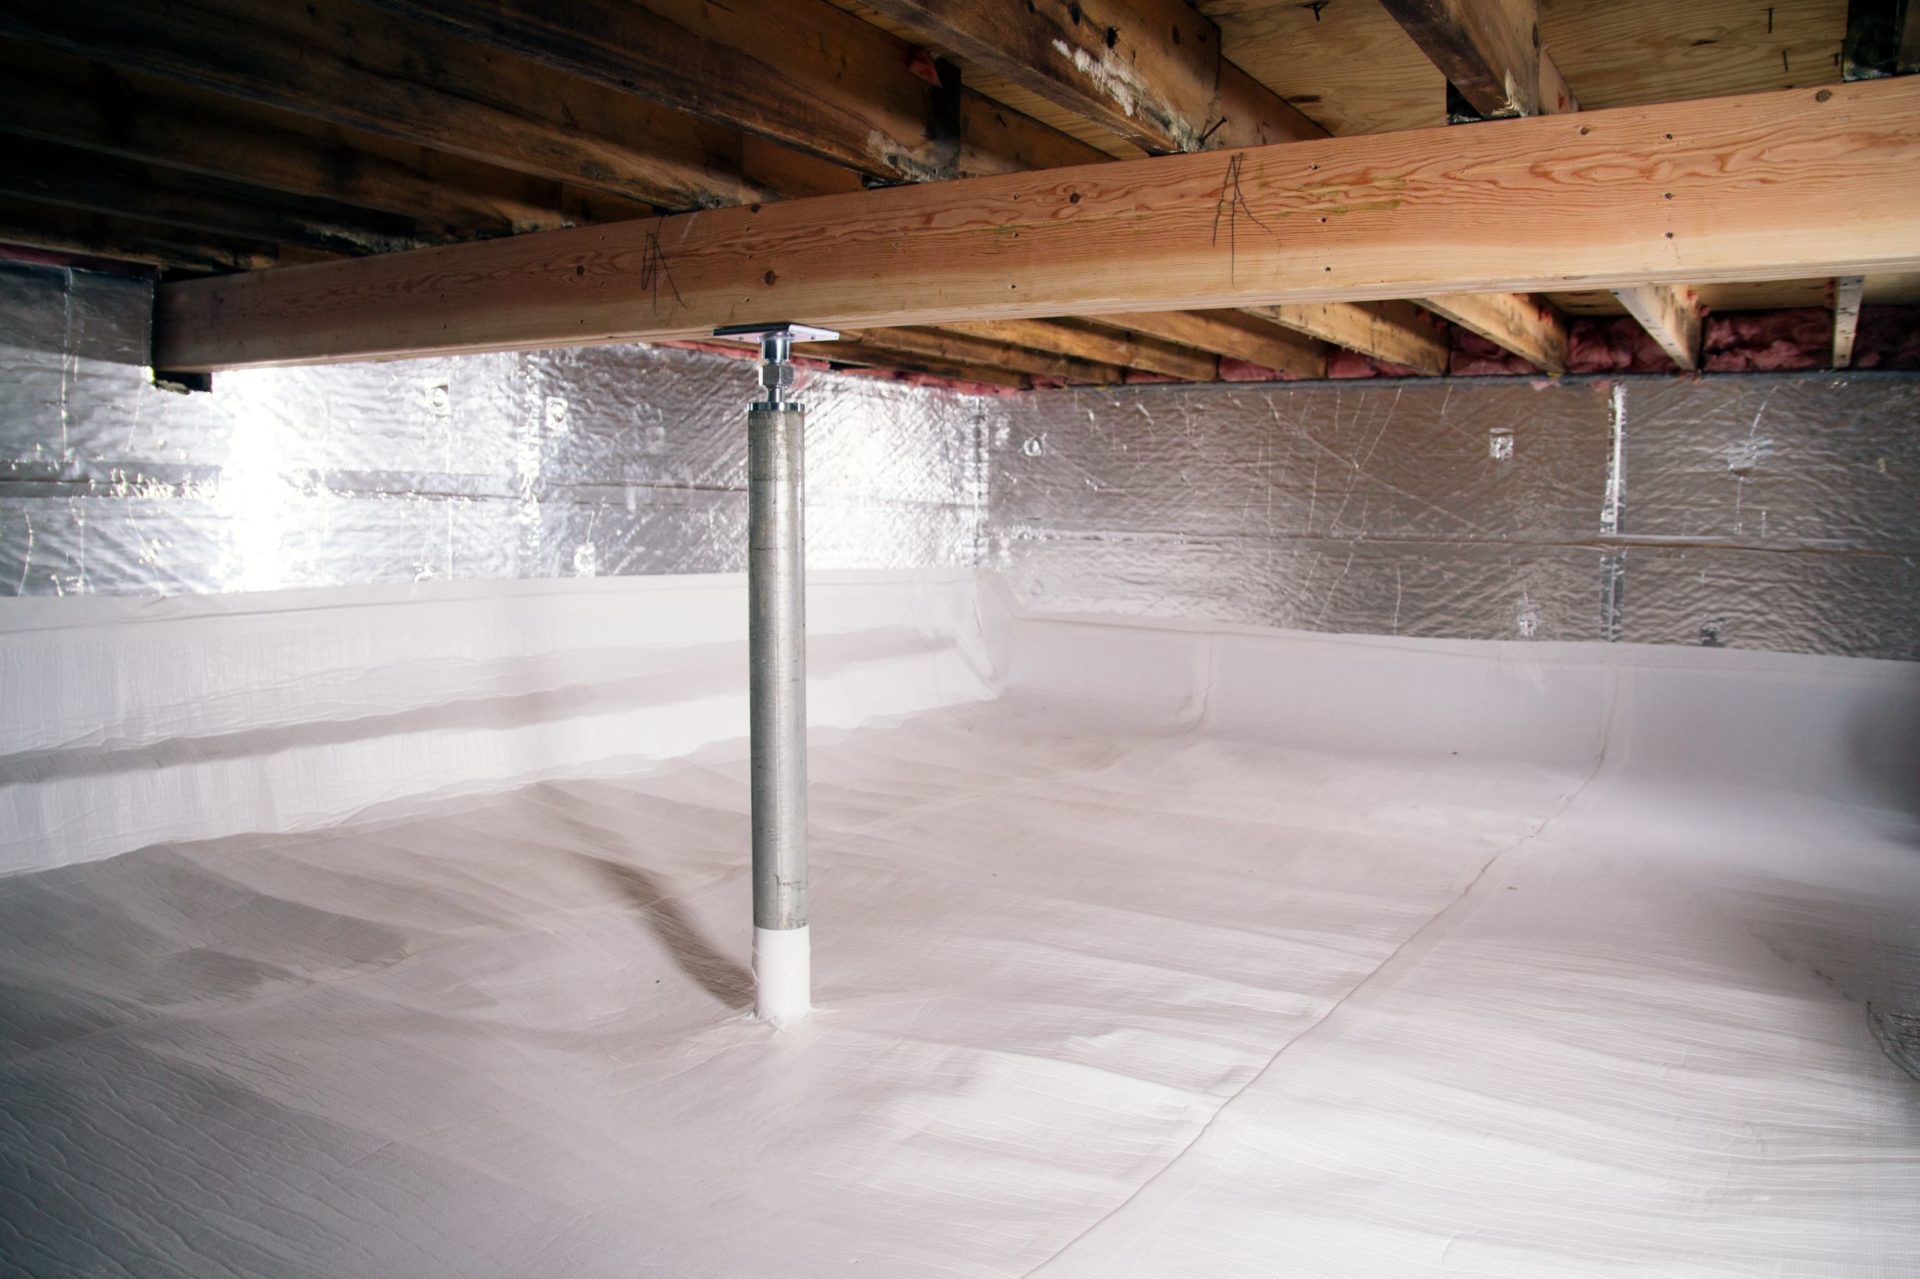 Crawl spaces tend to affect the fresh air quality of the living space